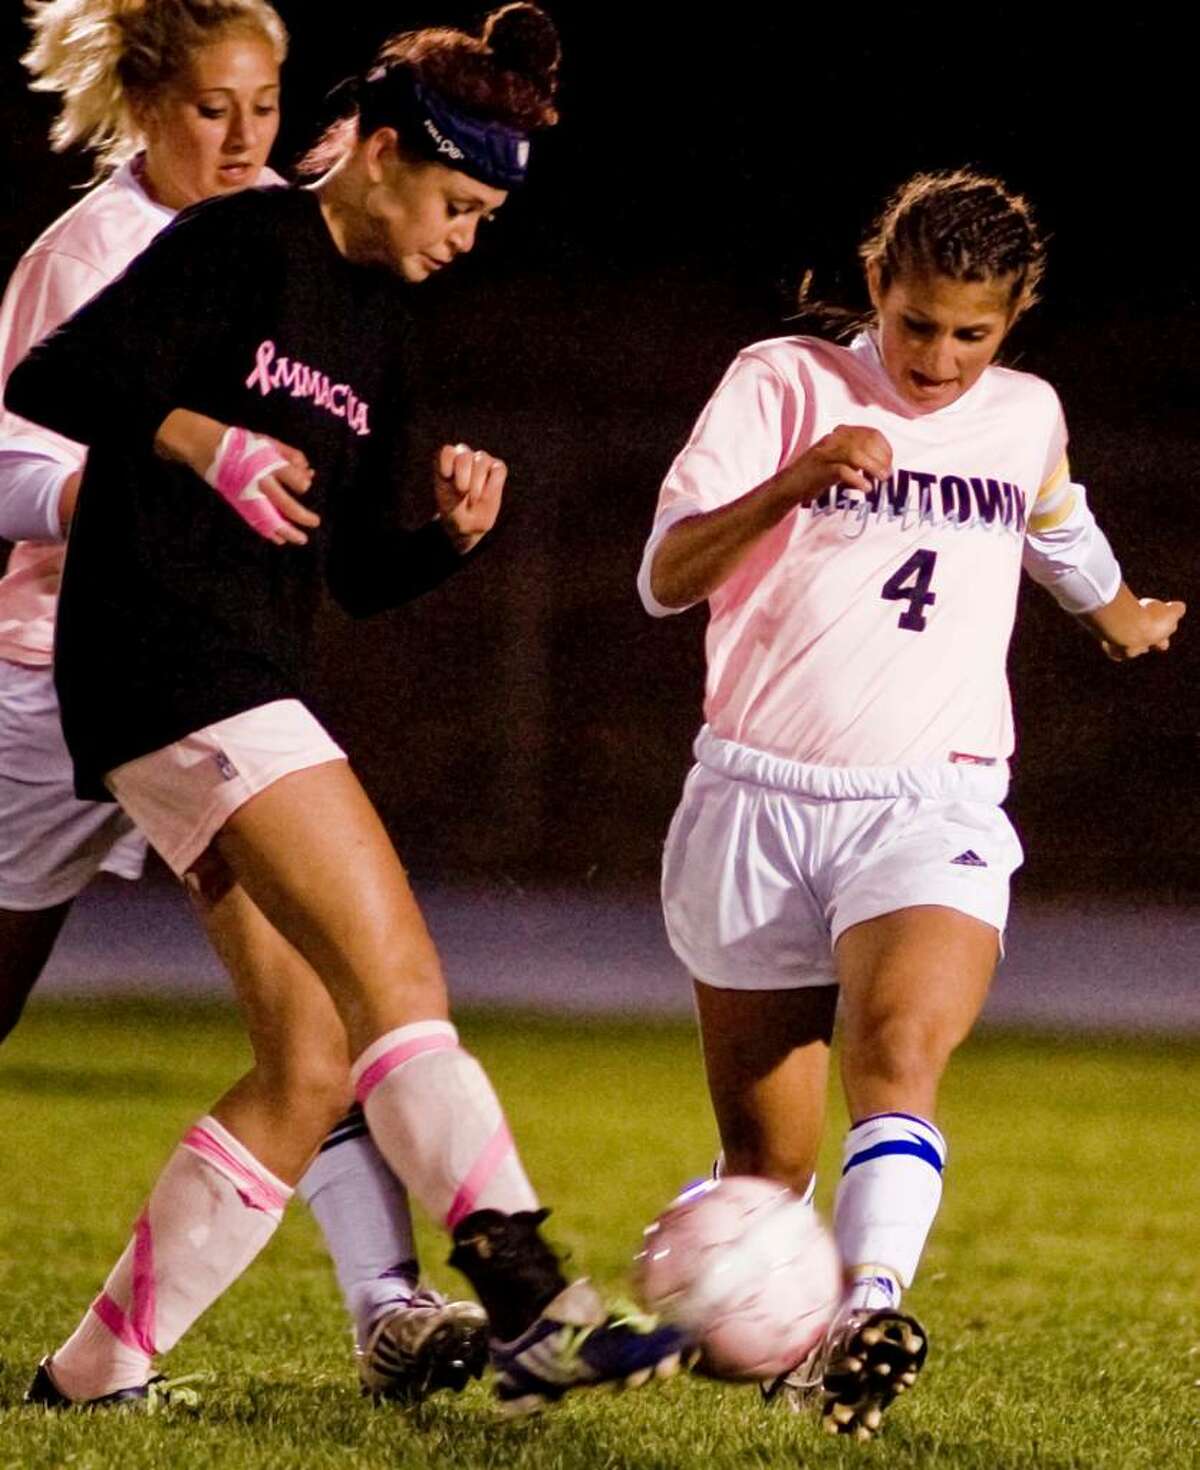 Immaculate sophomore Corina DaSilva and Newtown senior Ally Modzelewski battle for control in a girls soccer game at Newtown. Wednesday, Sept. 30, 2009